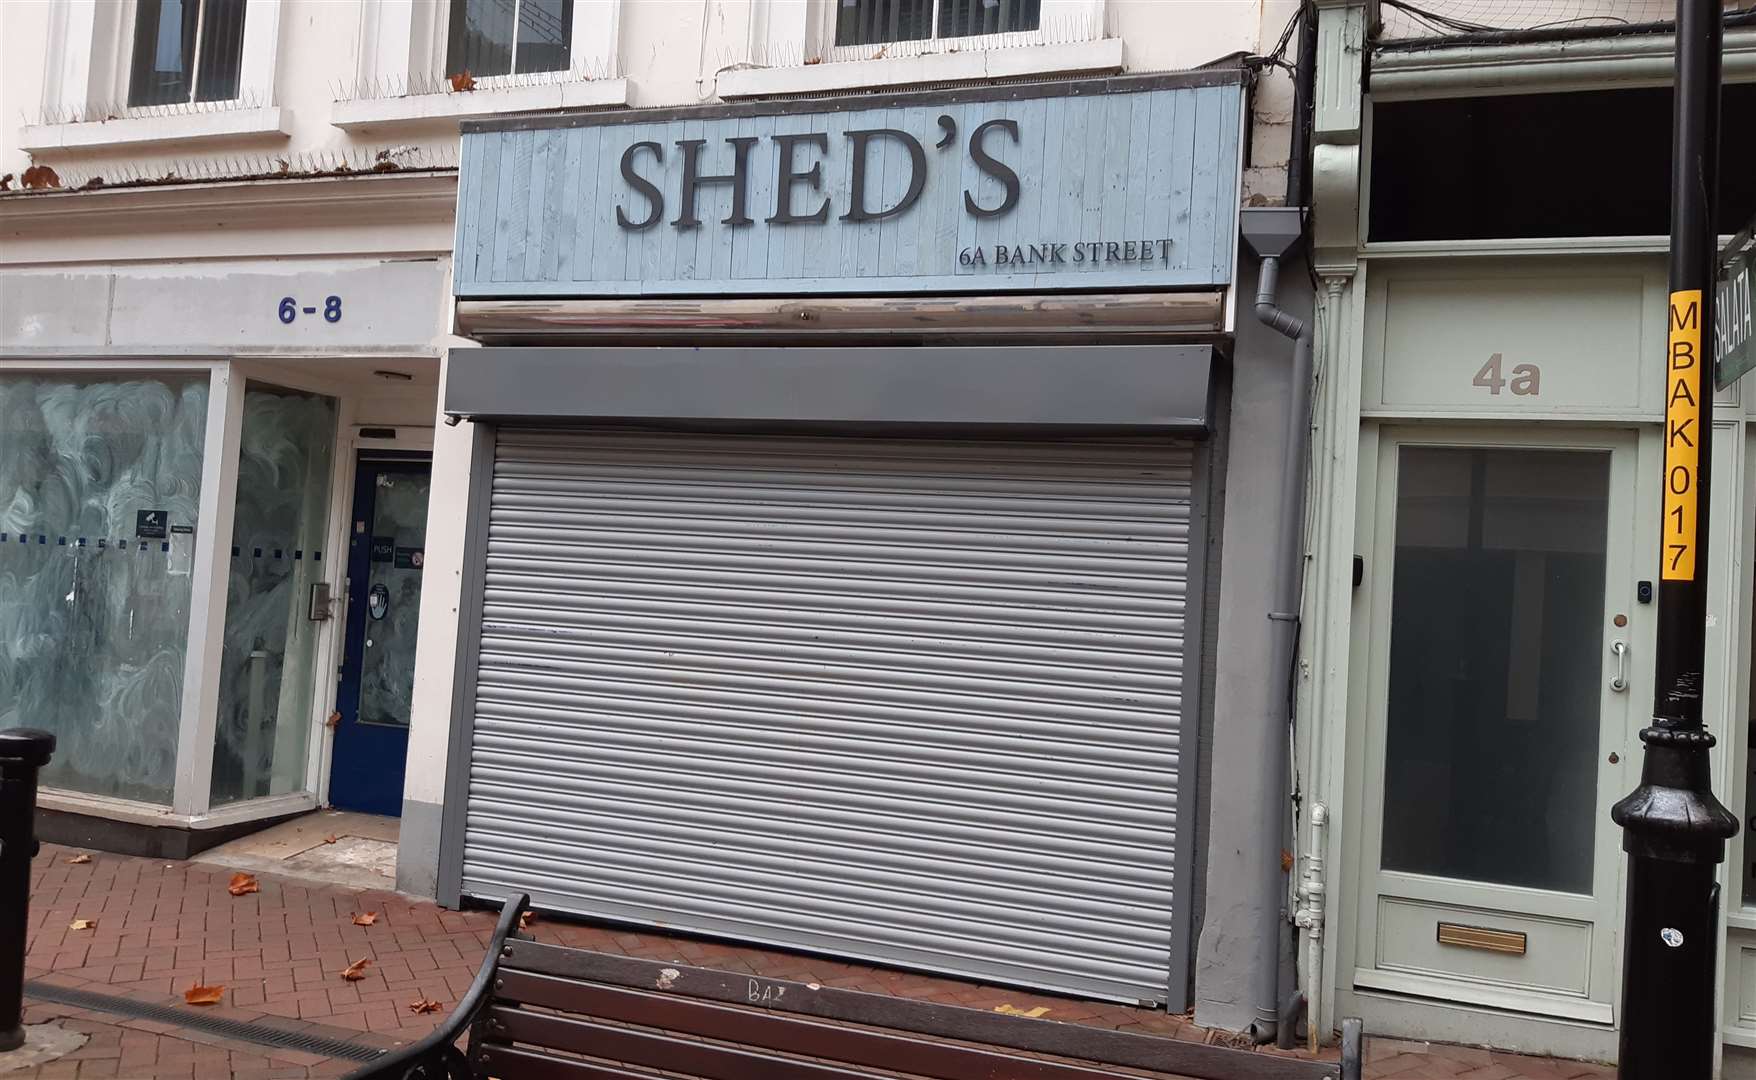 The shutters are down at Shed's in Bank Street